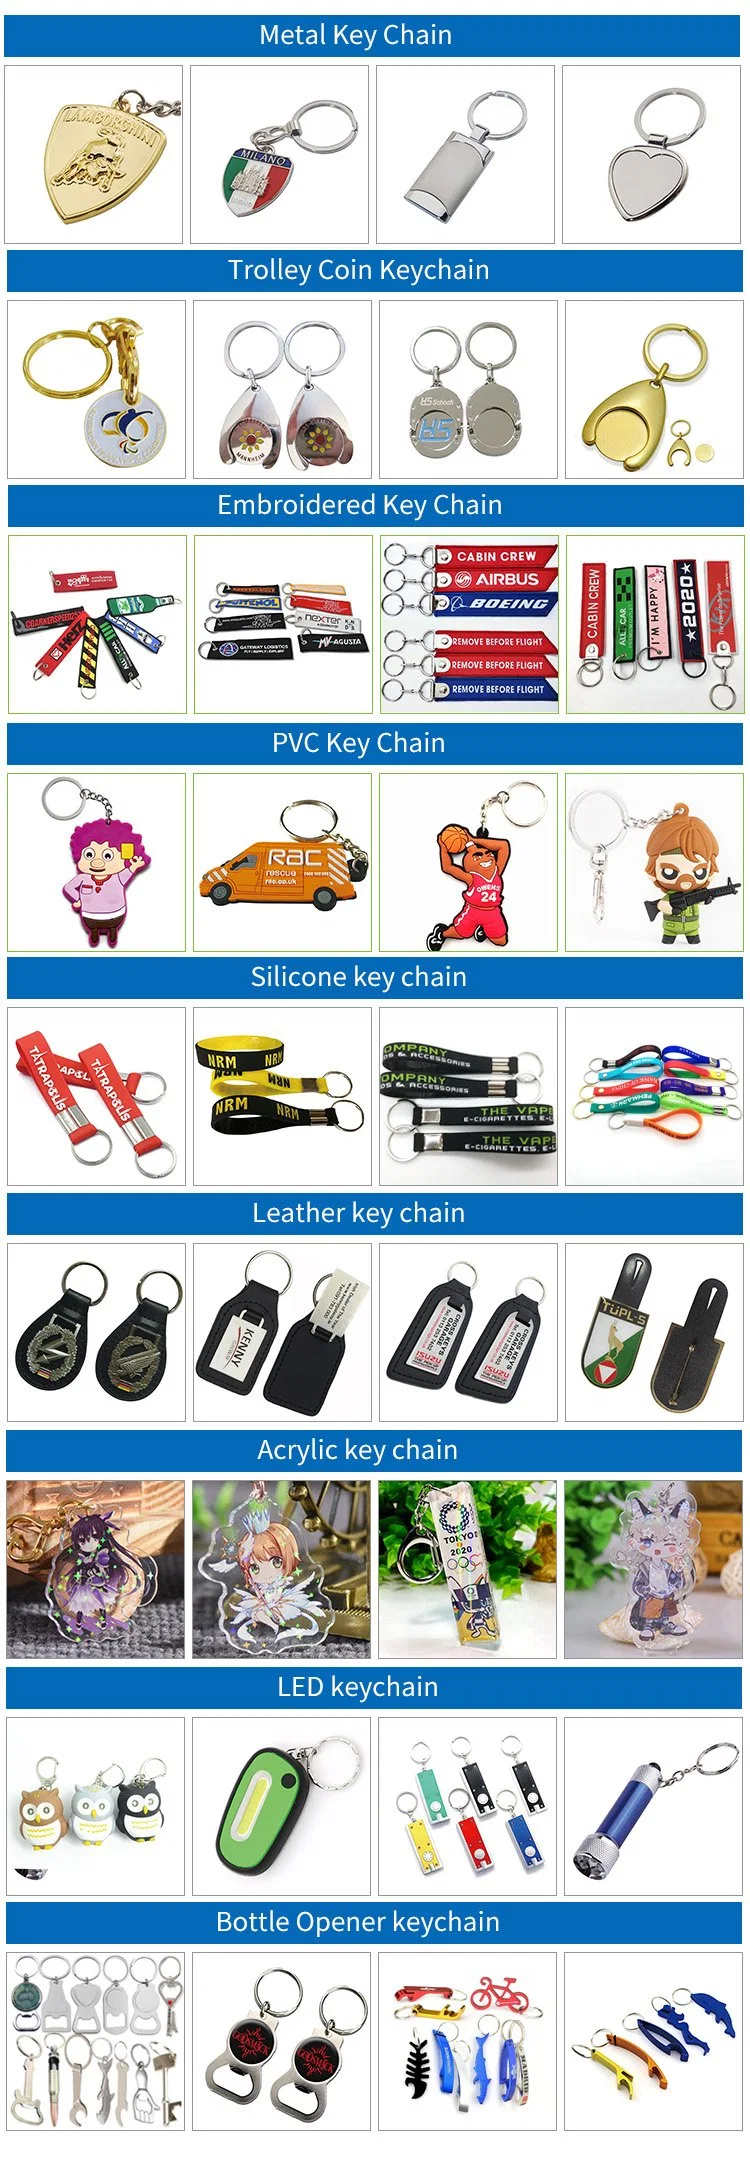 China Wholesale Custom Metal Charm Hard Enamel Cactus Succulent Trolley Shopping Key Chain Holder Caddy Plant Woman Keychain for Decoration Token Coin